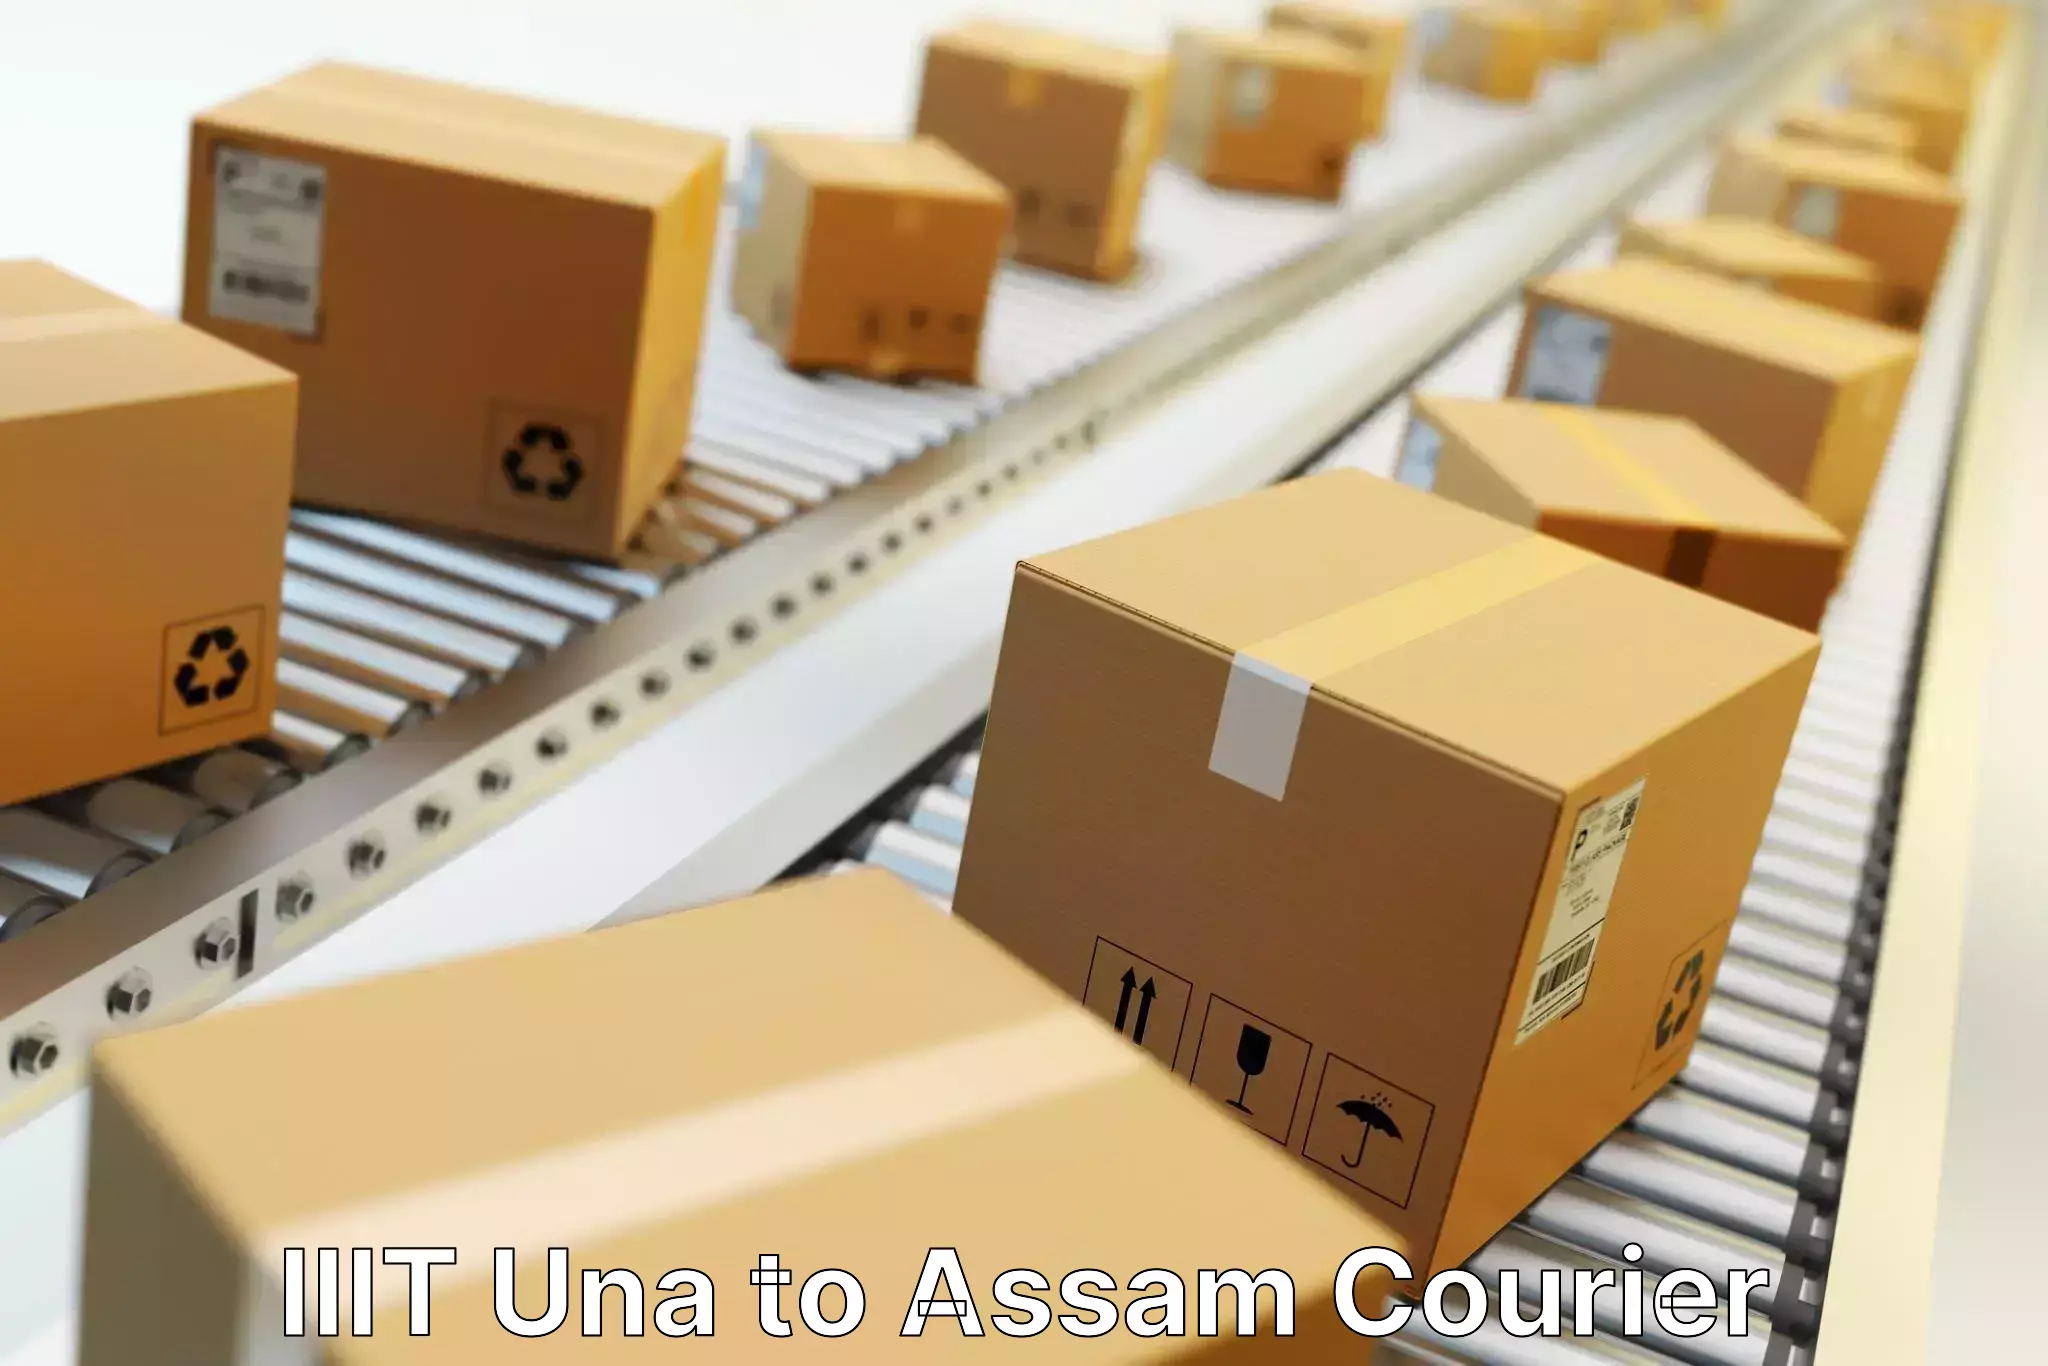 Retail shipping solutions IIIT Una to Agomani